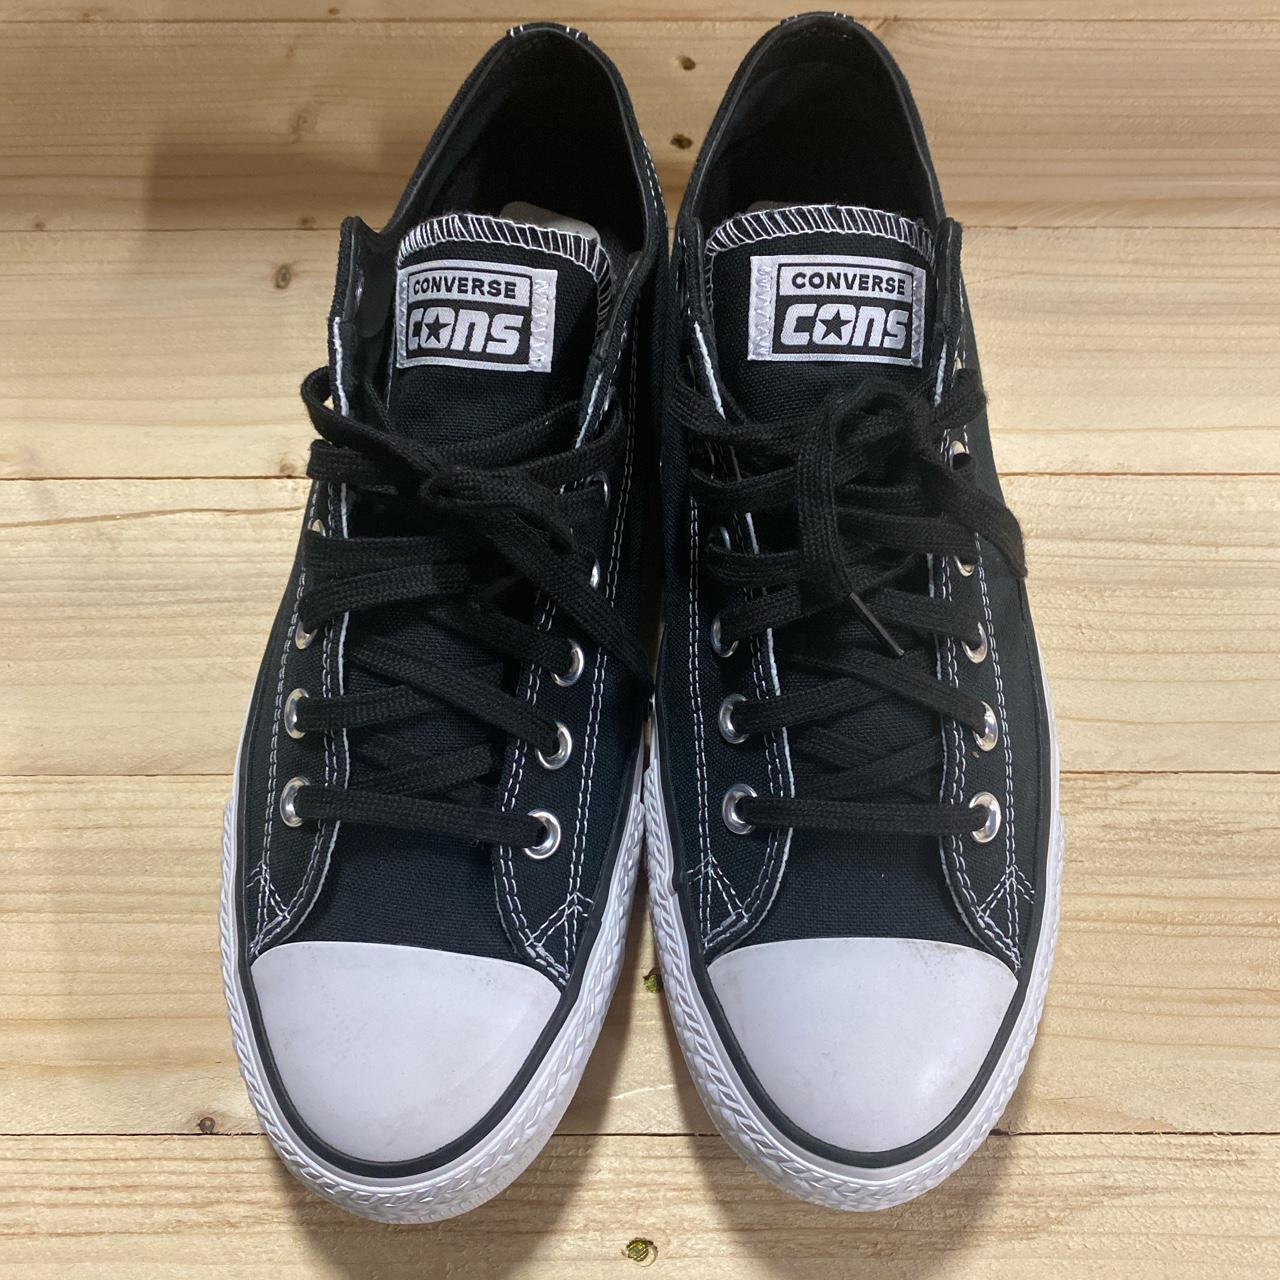 Converse Men's Black and White Trainers (3)